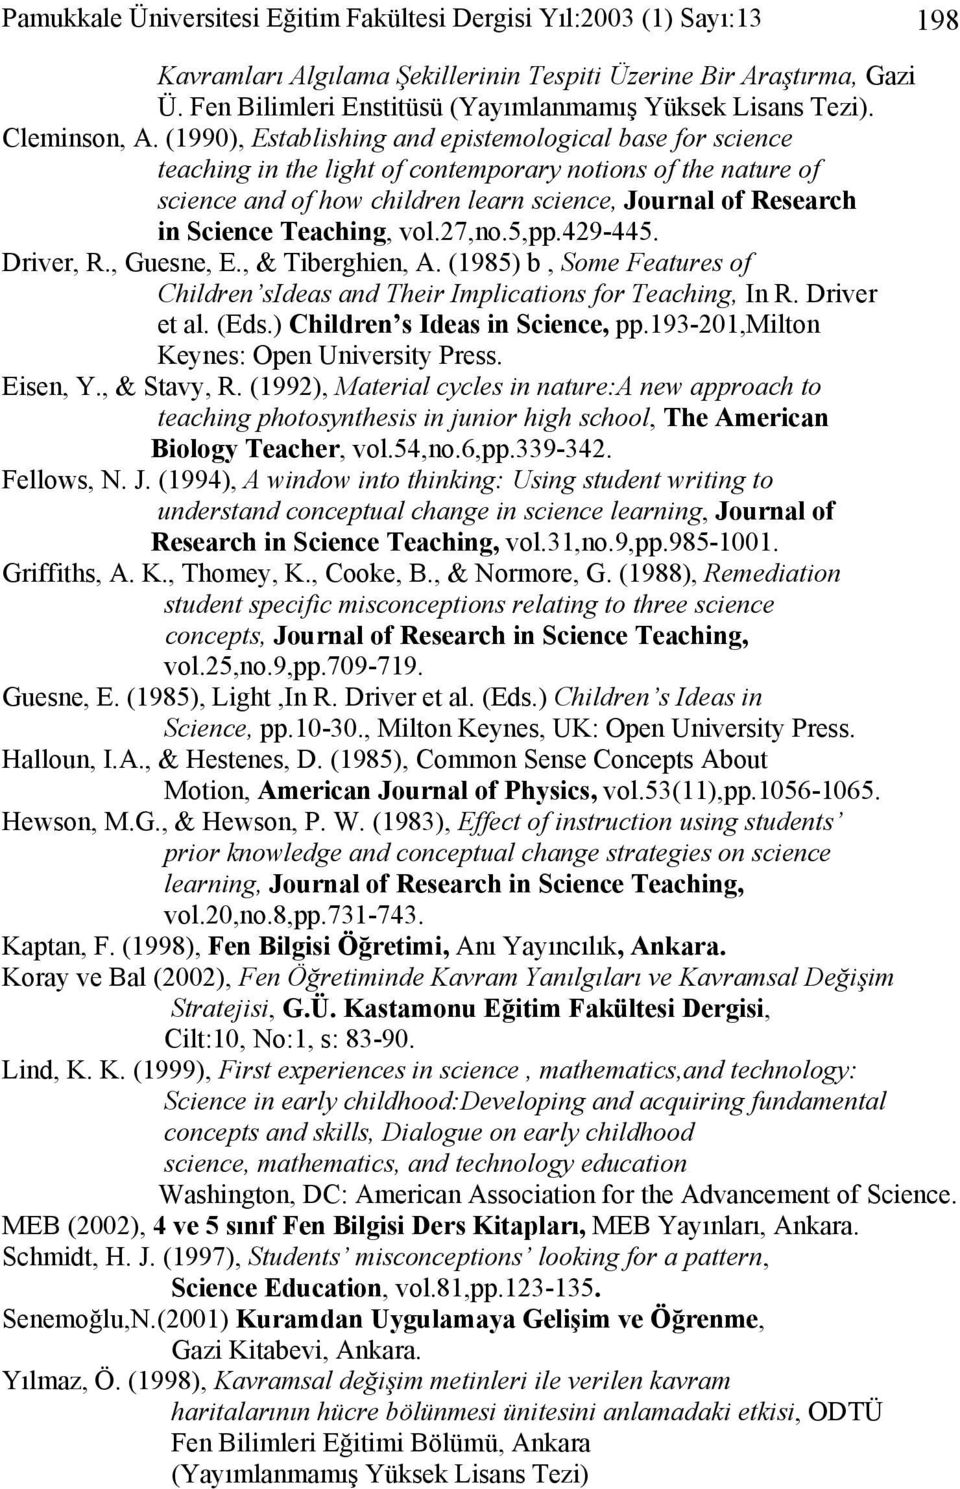 (1990), Establishing and epistemological base for science teaching in the light of contemporary notions of the nature of science and of how children learn science, Journal of Research in Science